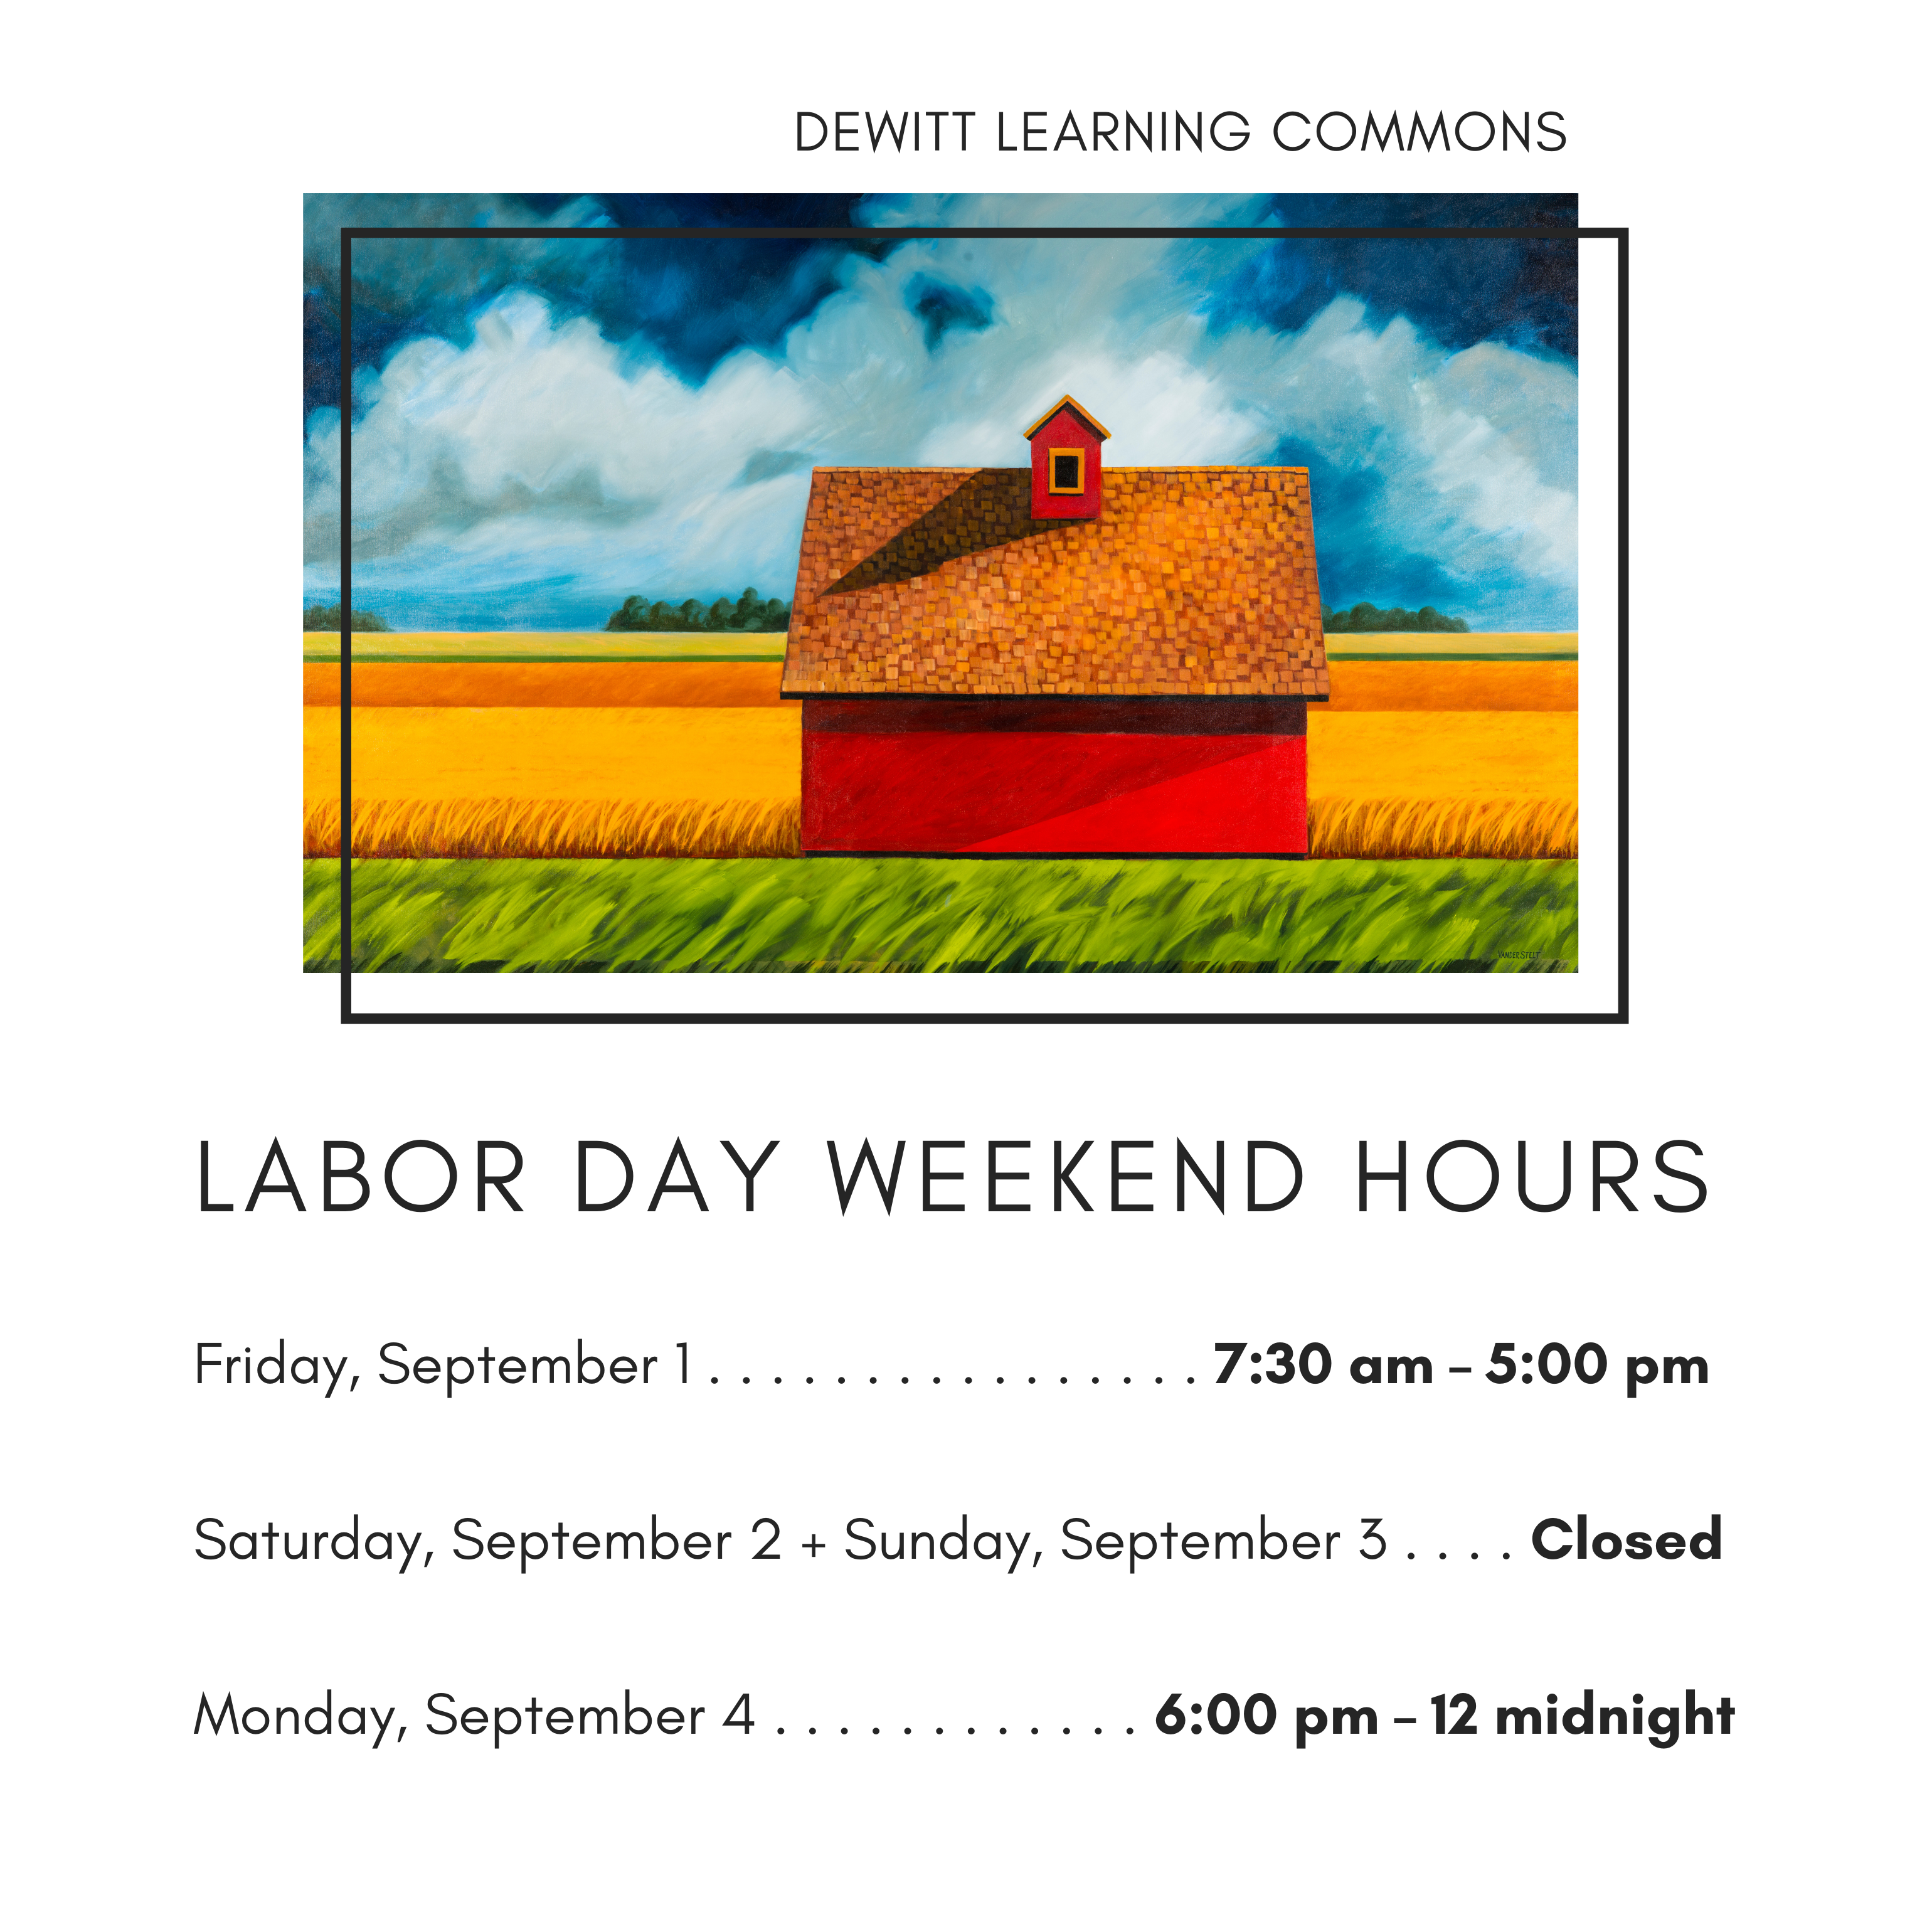 DeWitt Learning Commons Labor Day Weekend Hours: Friday, September 1: 7:30 am – 5:00 pm; Saturday, September 2 + Sunday, September 3: Closed;  Monday, September 4: 6:00 pm – 12 midnight.